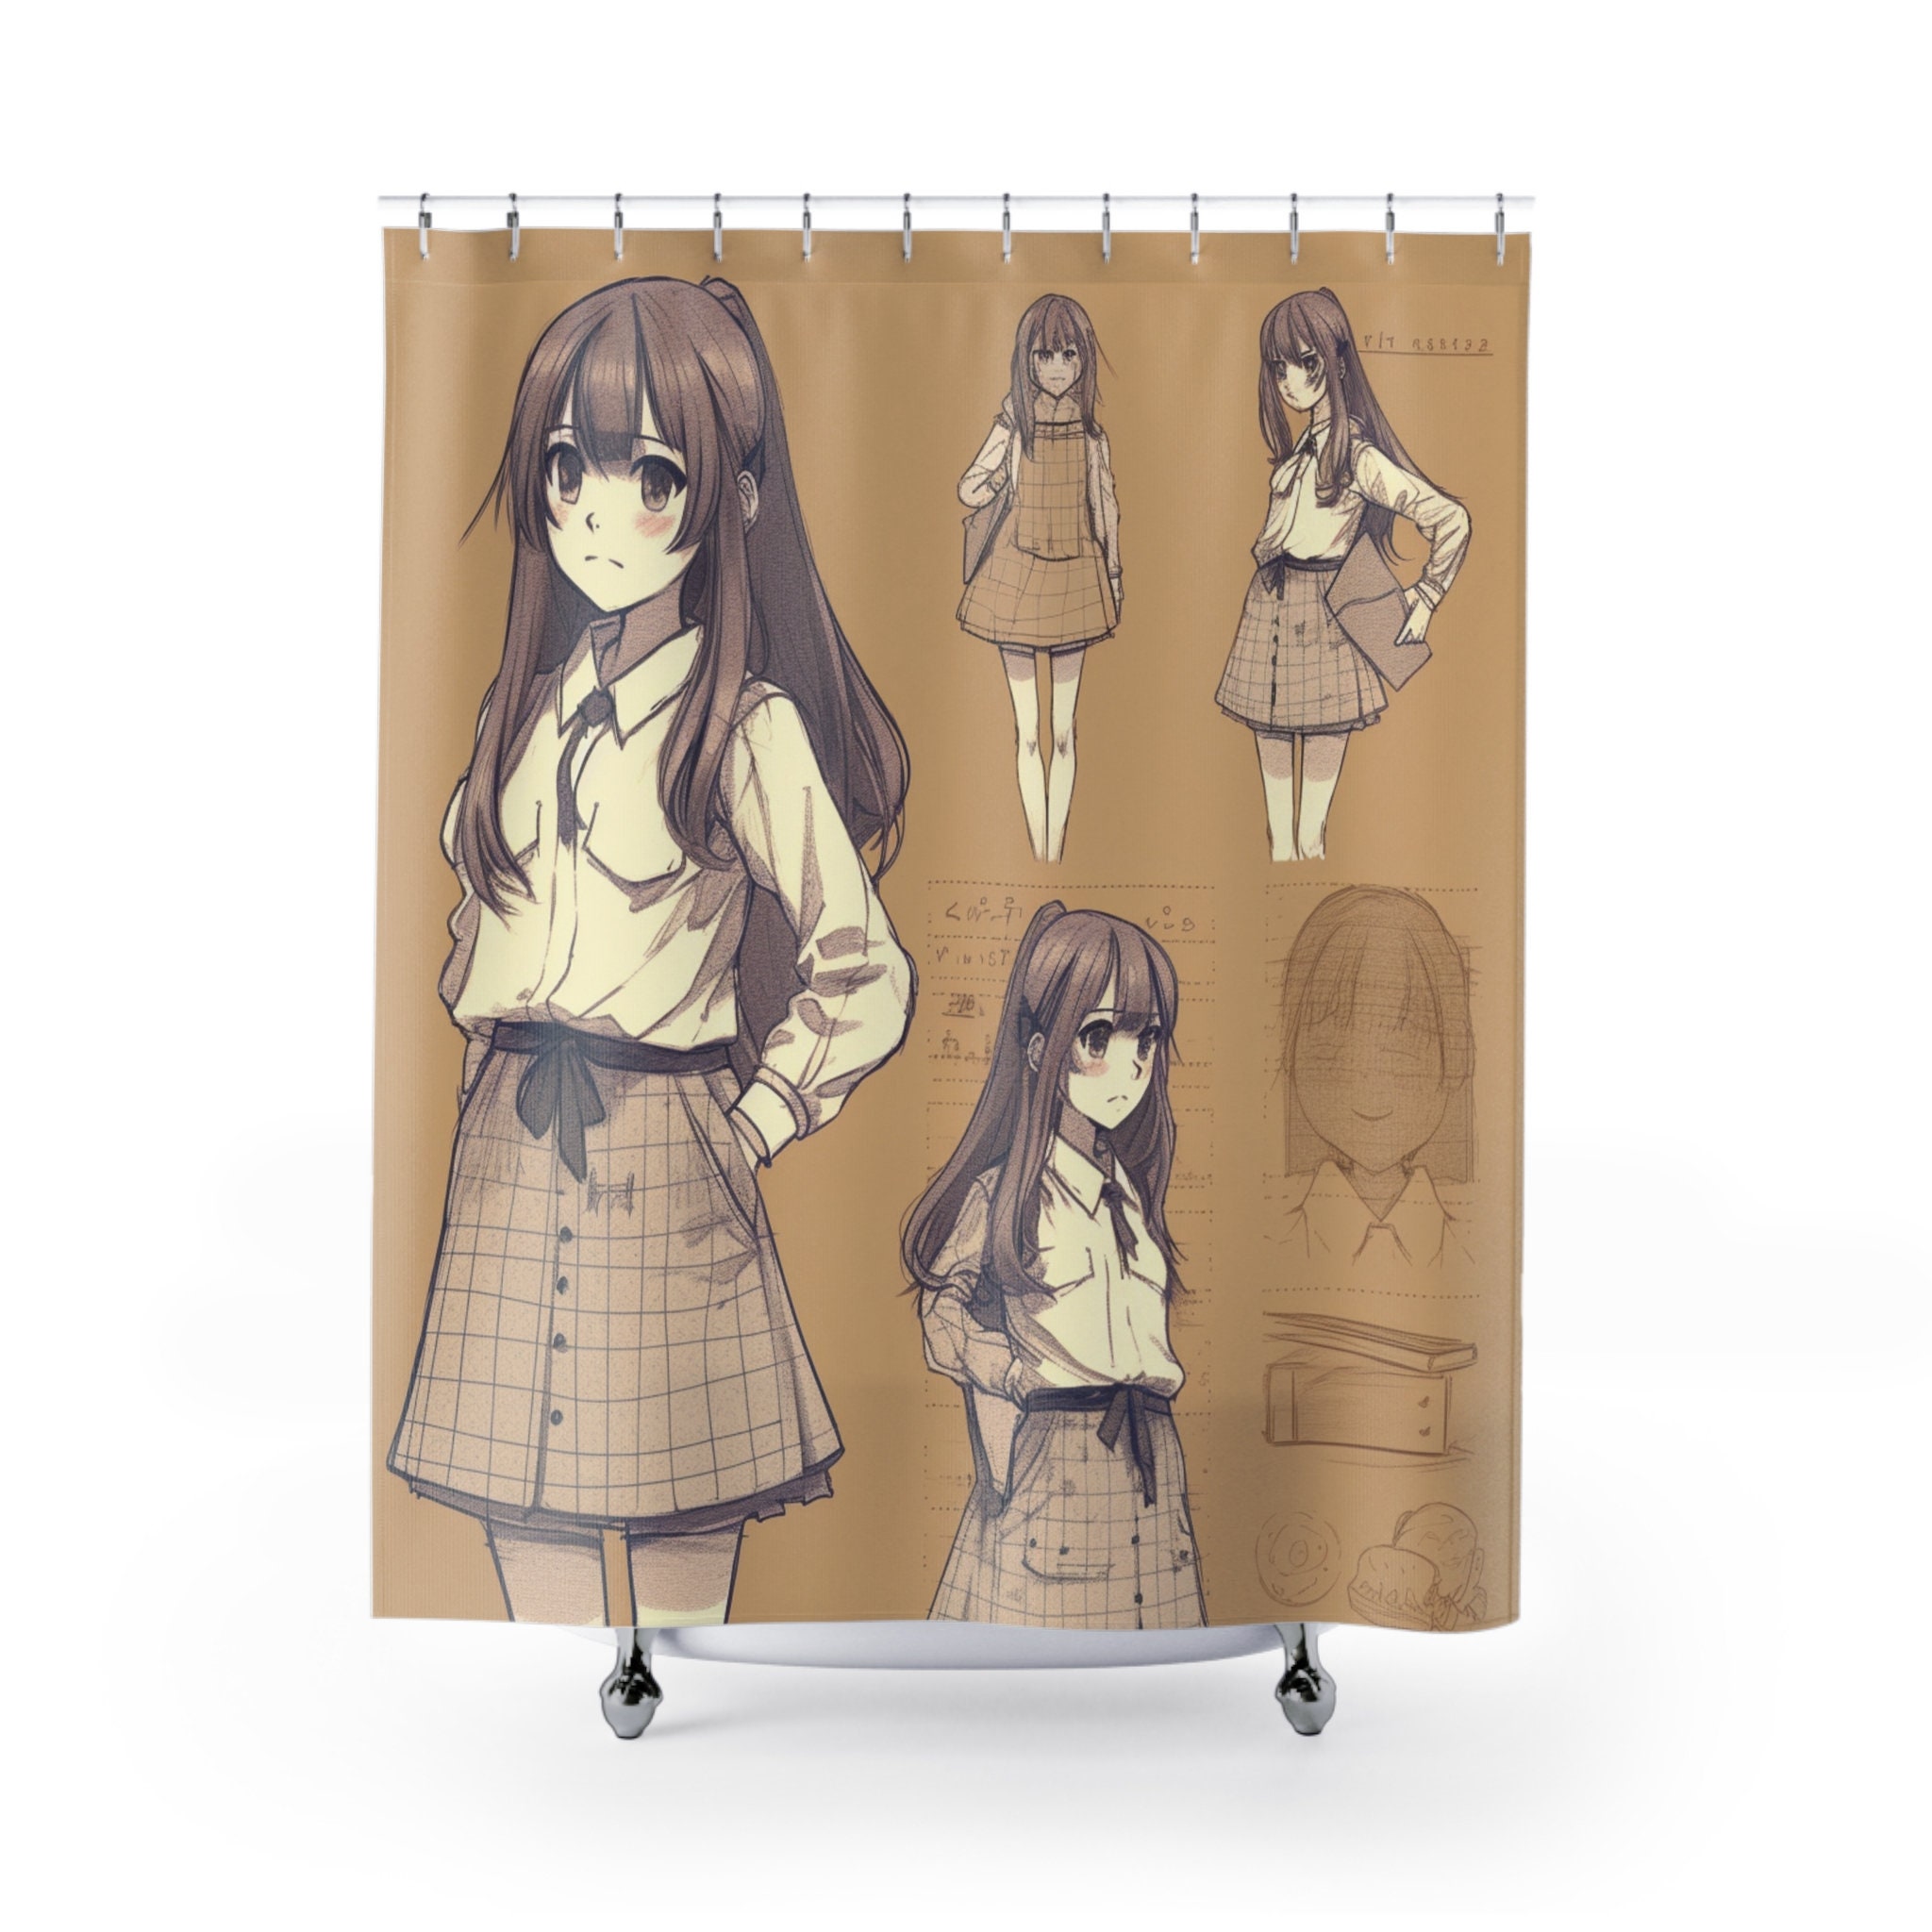 Anime Shower Curtain, Cute Manga Girl Blowing Bubbles from a Flower  Japanese Cartoon Artsy Japan Art Print, Fabric Bathroom Set with Hooks, 69W  X 70L Inches, Pink Yellow, by Ambesonne - Walmart.com